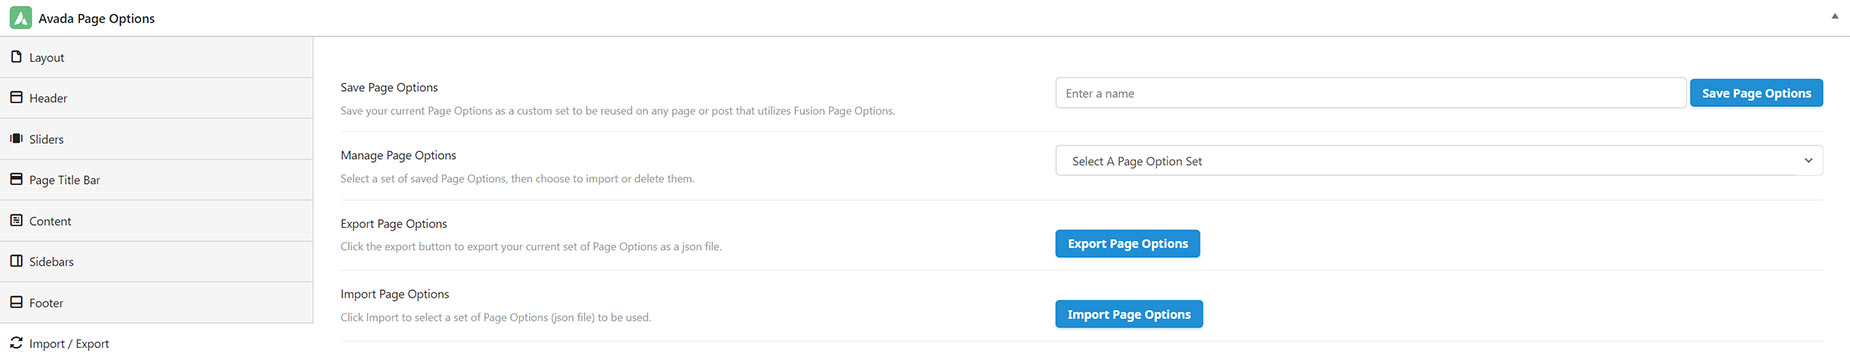 Avada Page Options > Import/Export